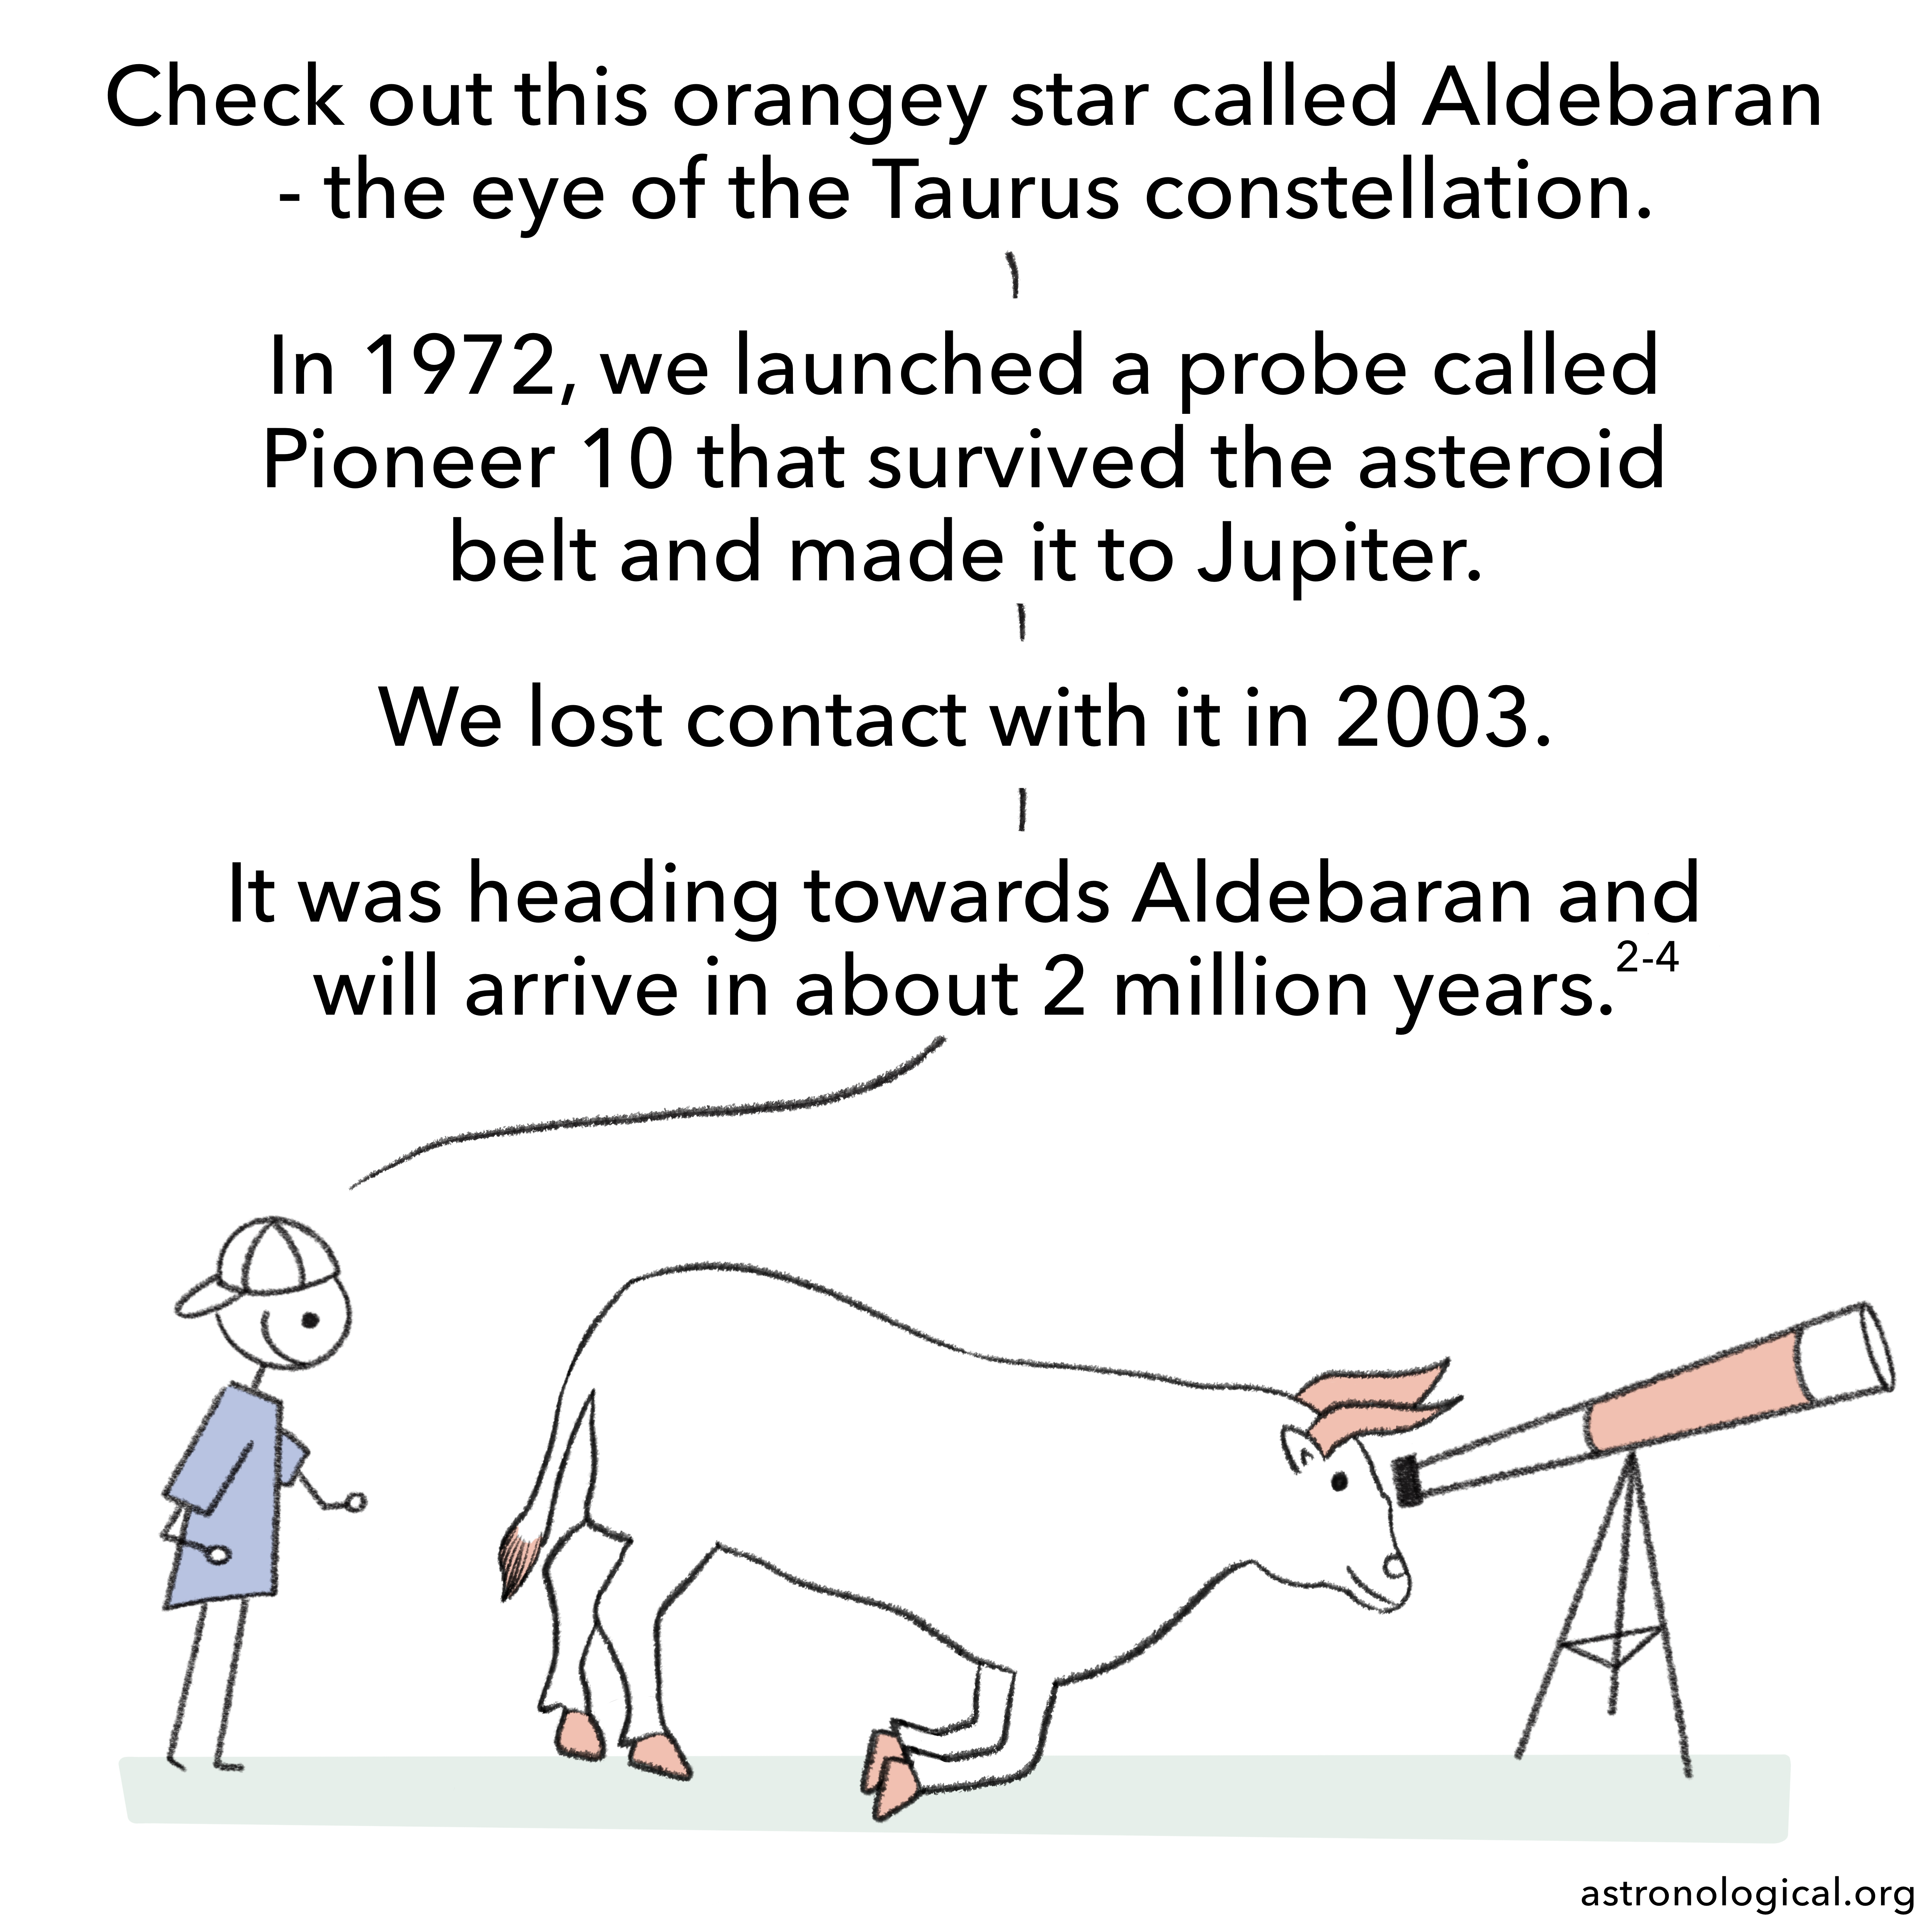 They swap positions and now the bull is looking through the telescope. The guy says enthusiastically: Check out this orangey star called Aldebaran - the eye of the Taurus constellation. In 1972, we launched a probe called Pioneer 10 that survived the asteroid belt and made it to Jupiter. We lost contact with it in 2003. It was heading towards Aldebaran and will arrive in about 2 million years.